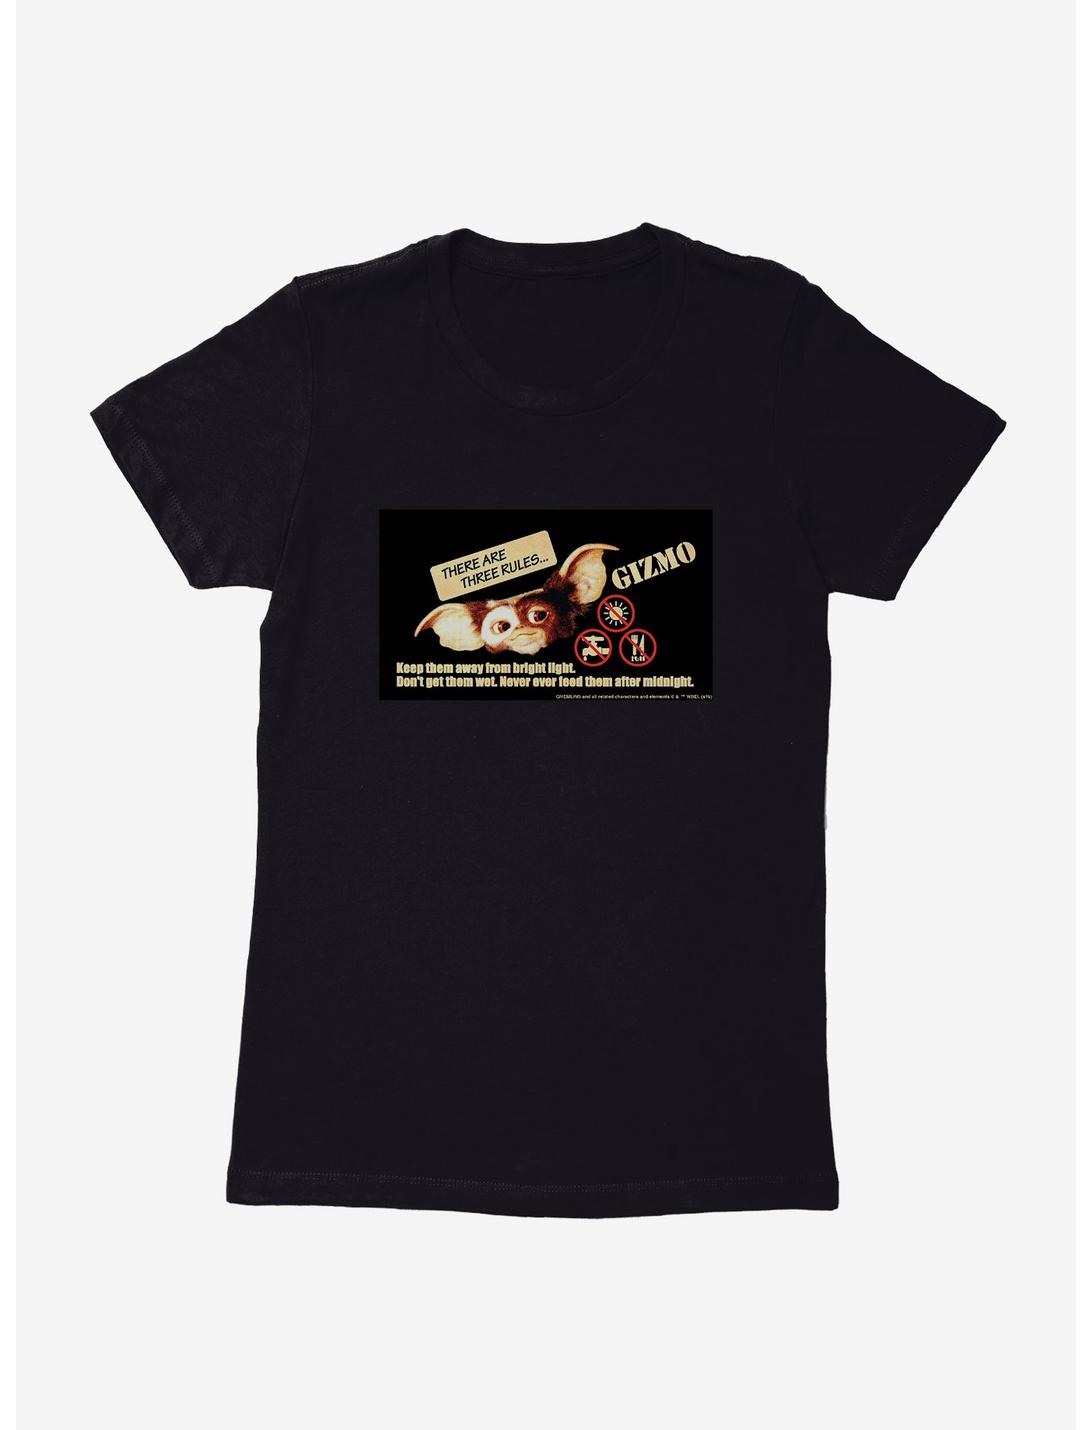 Gremlins Gizmo Rules To Follow Womens T-Shirt, BLACK, hi-res